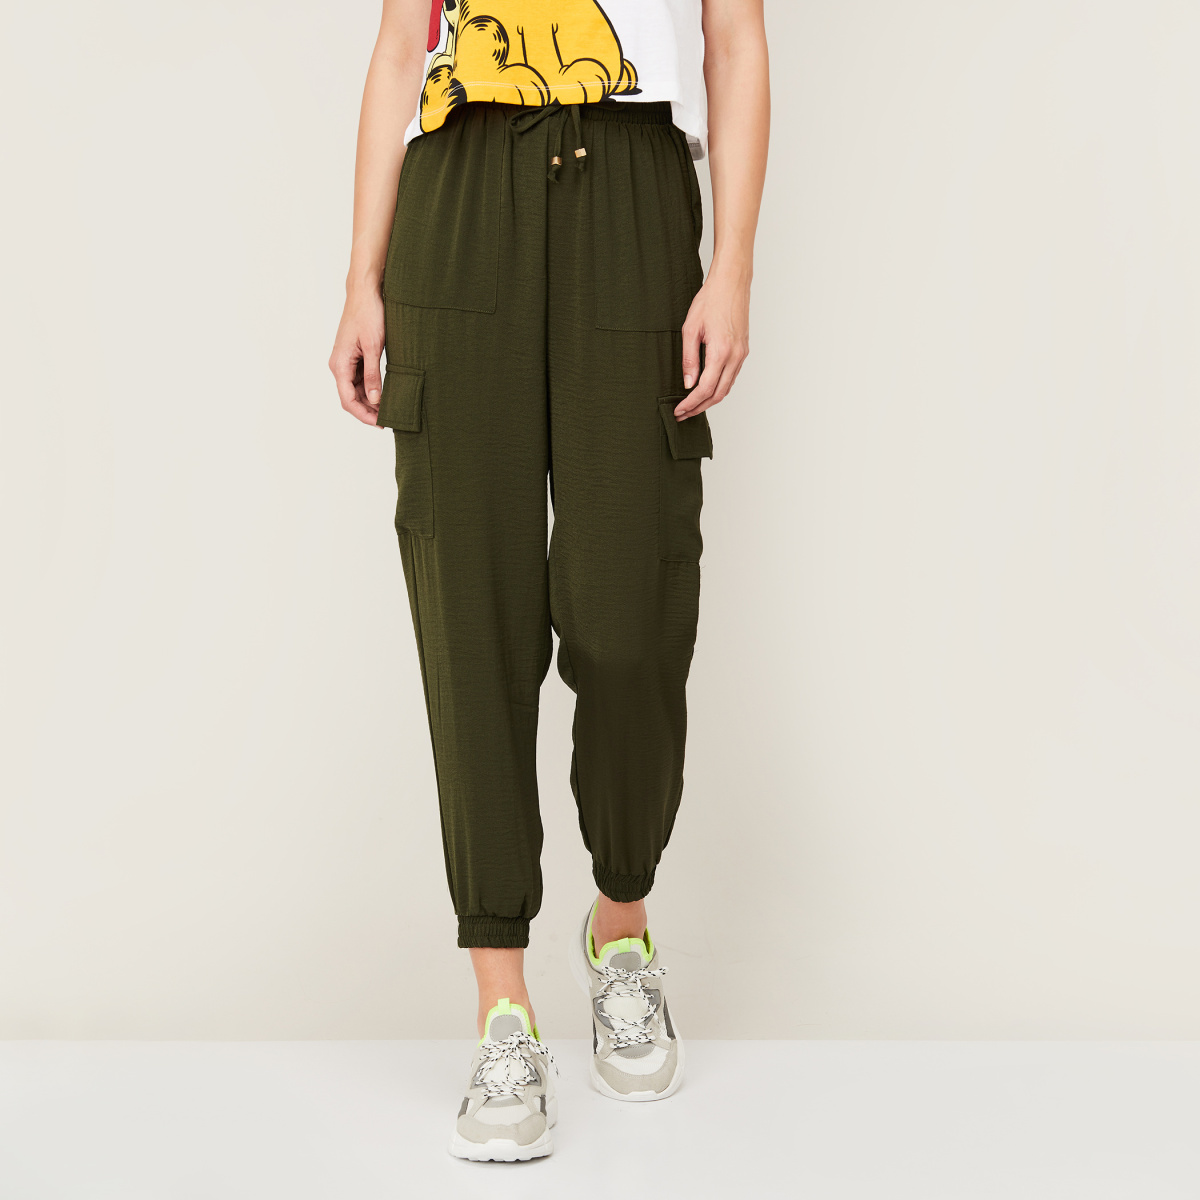 Regular-fit cargo trousers in an eco-friendly fabric - Yasmine Military  Olive La Martina | Shop Online